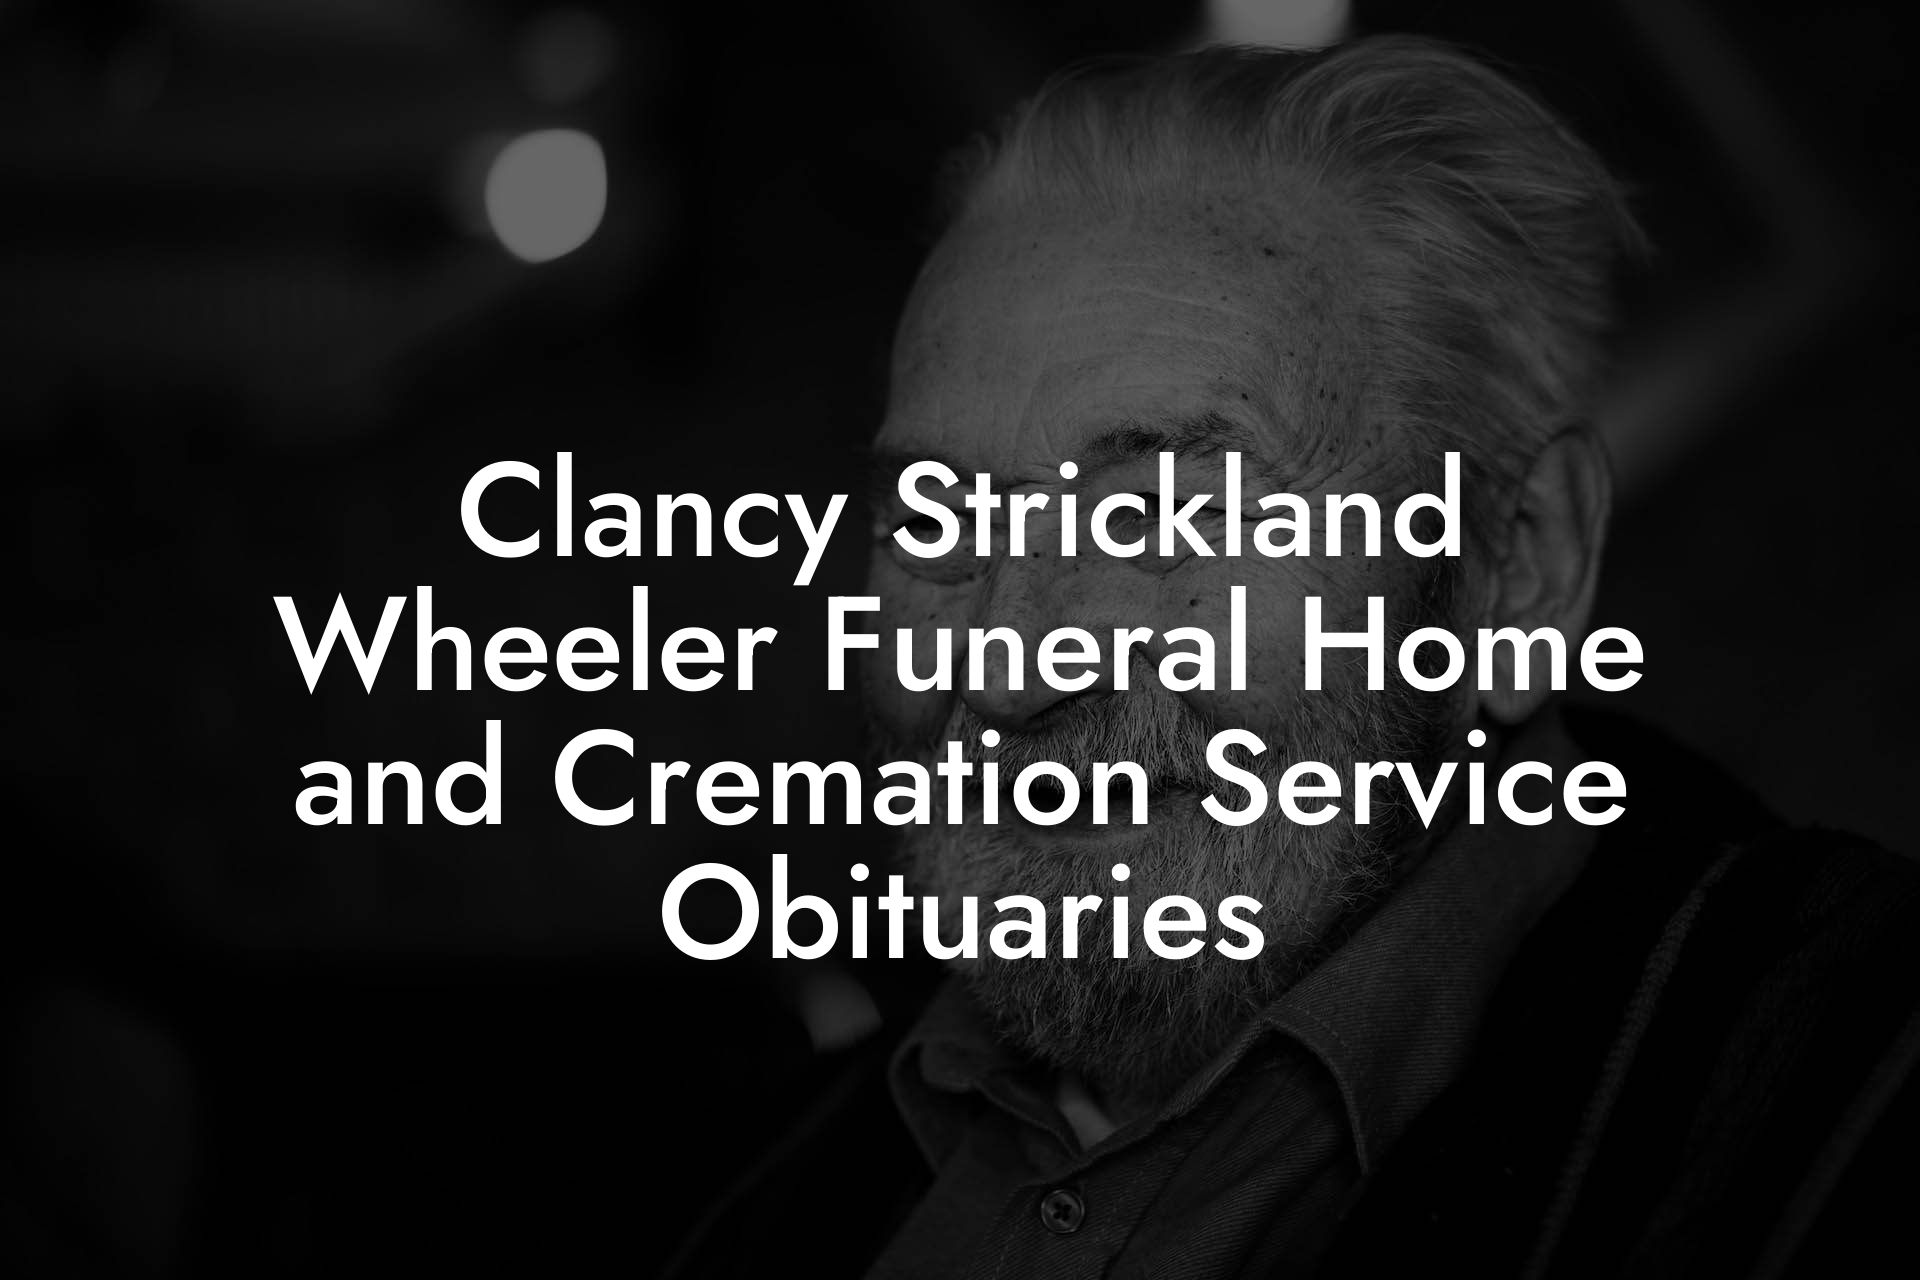 Clancy Strickland Wheeler Funeral Home and Cremation Service Obituaries